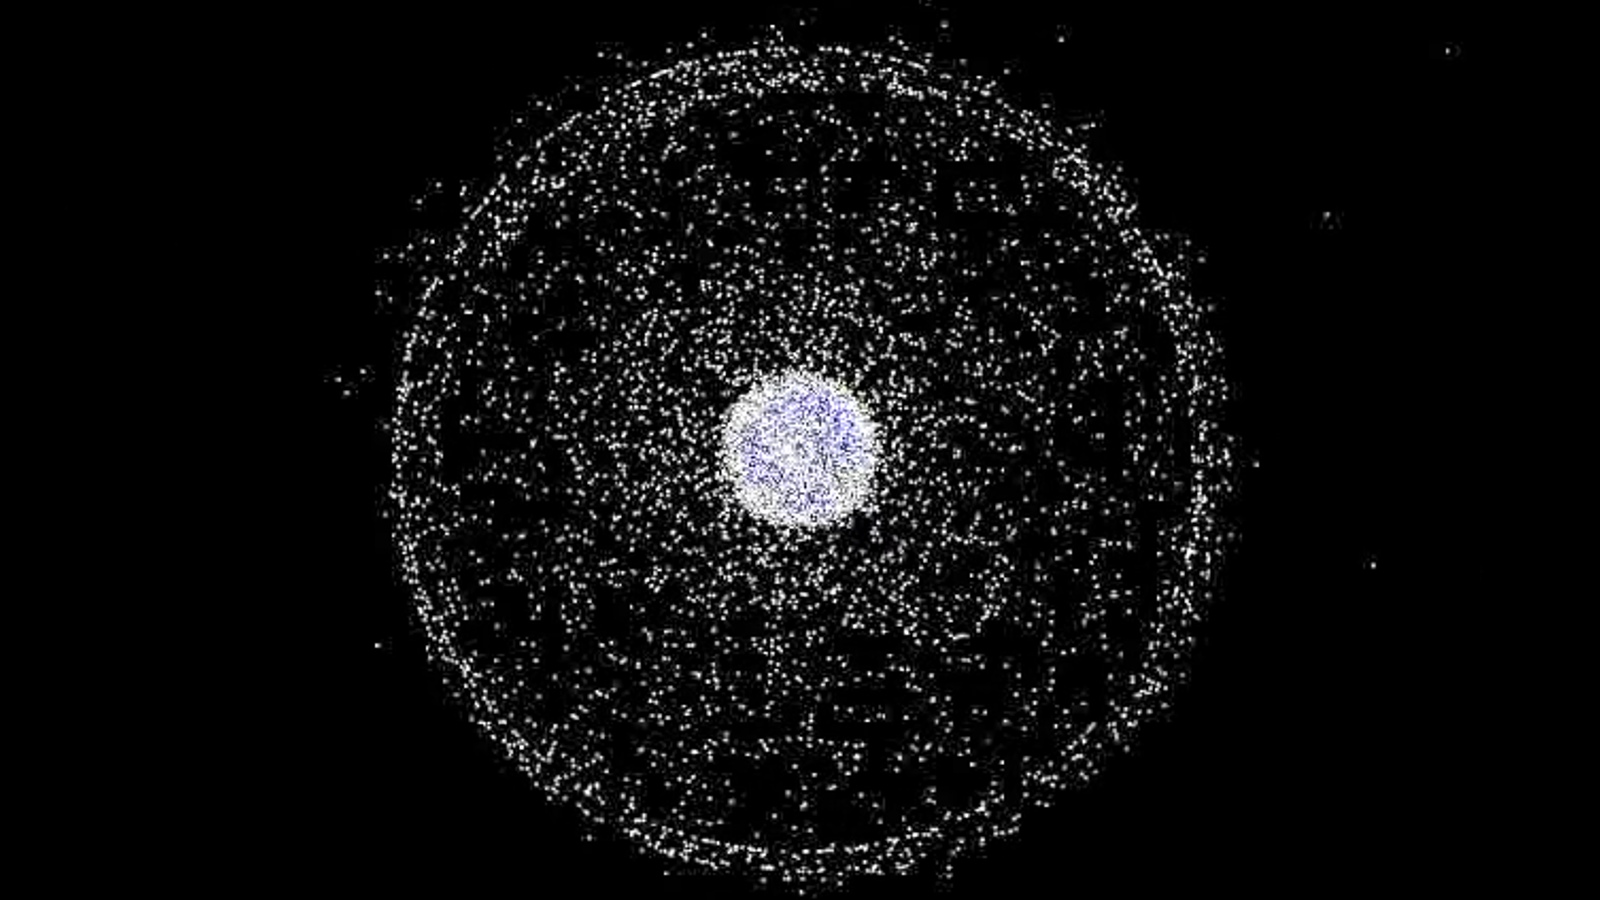 Earth surrounded by white dots that represent space junk